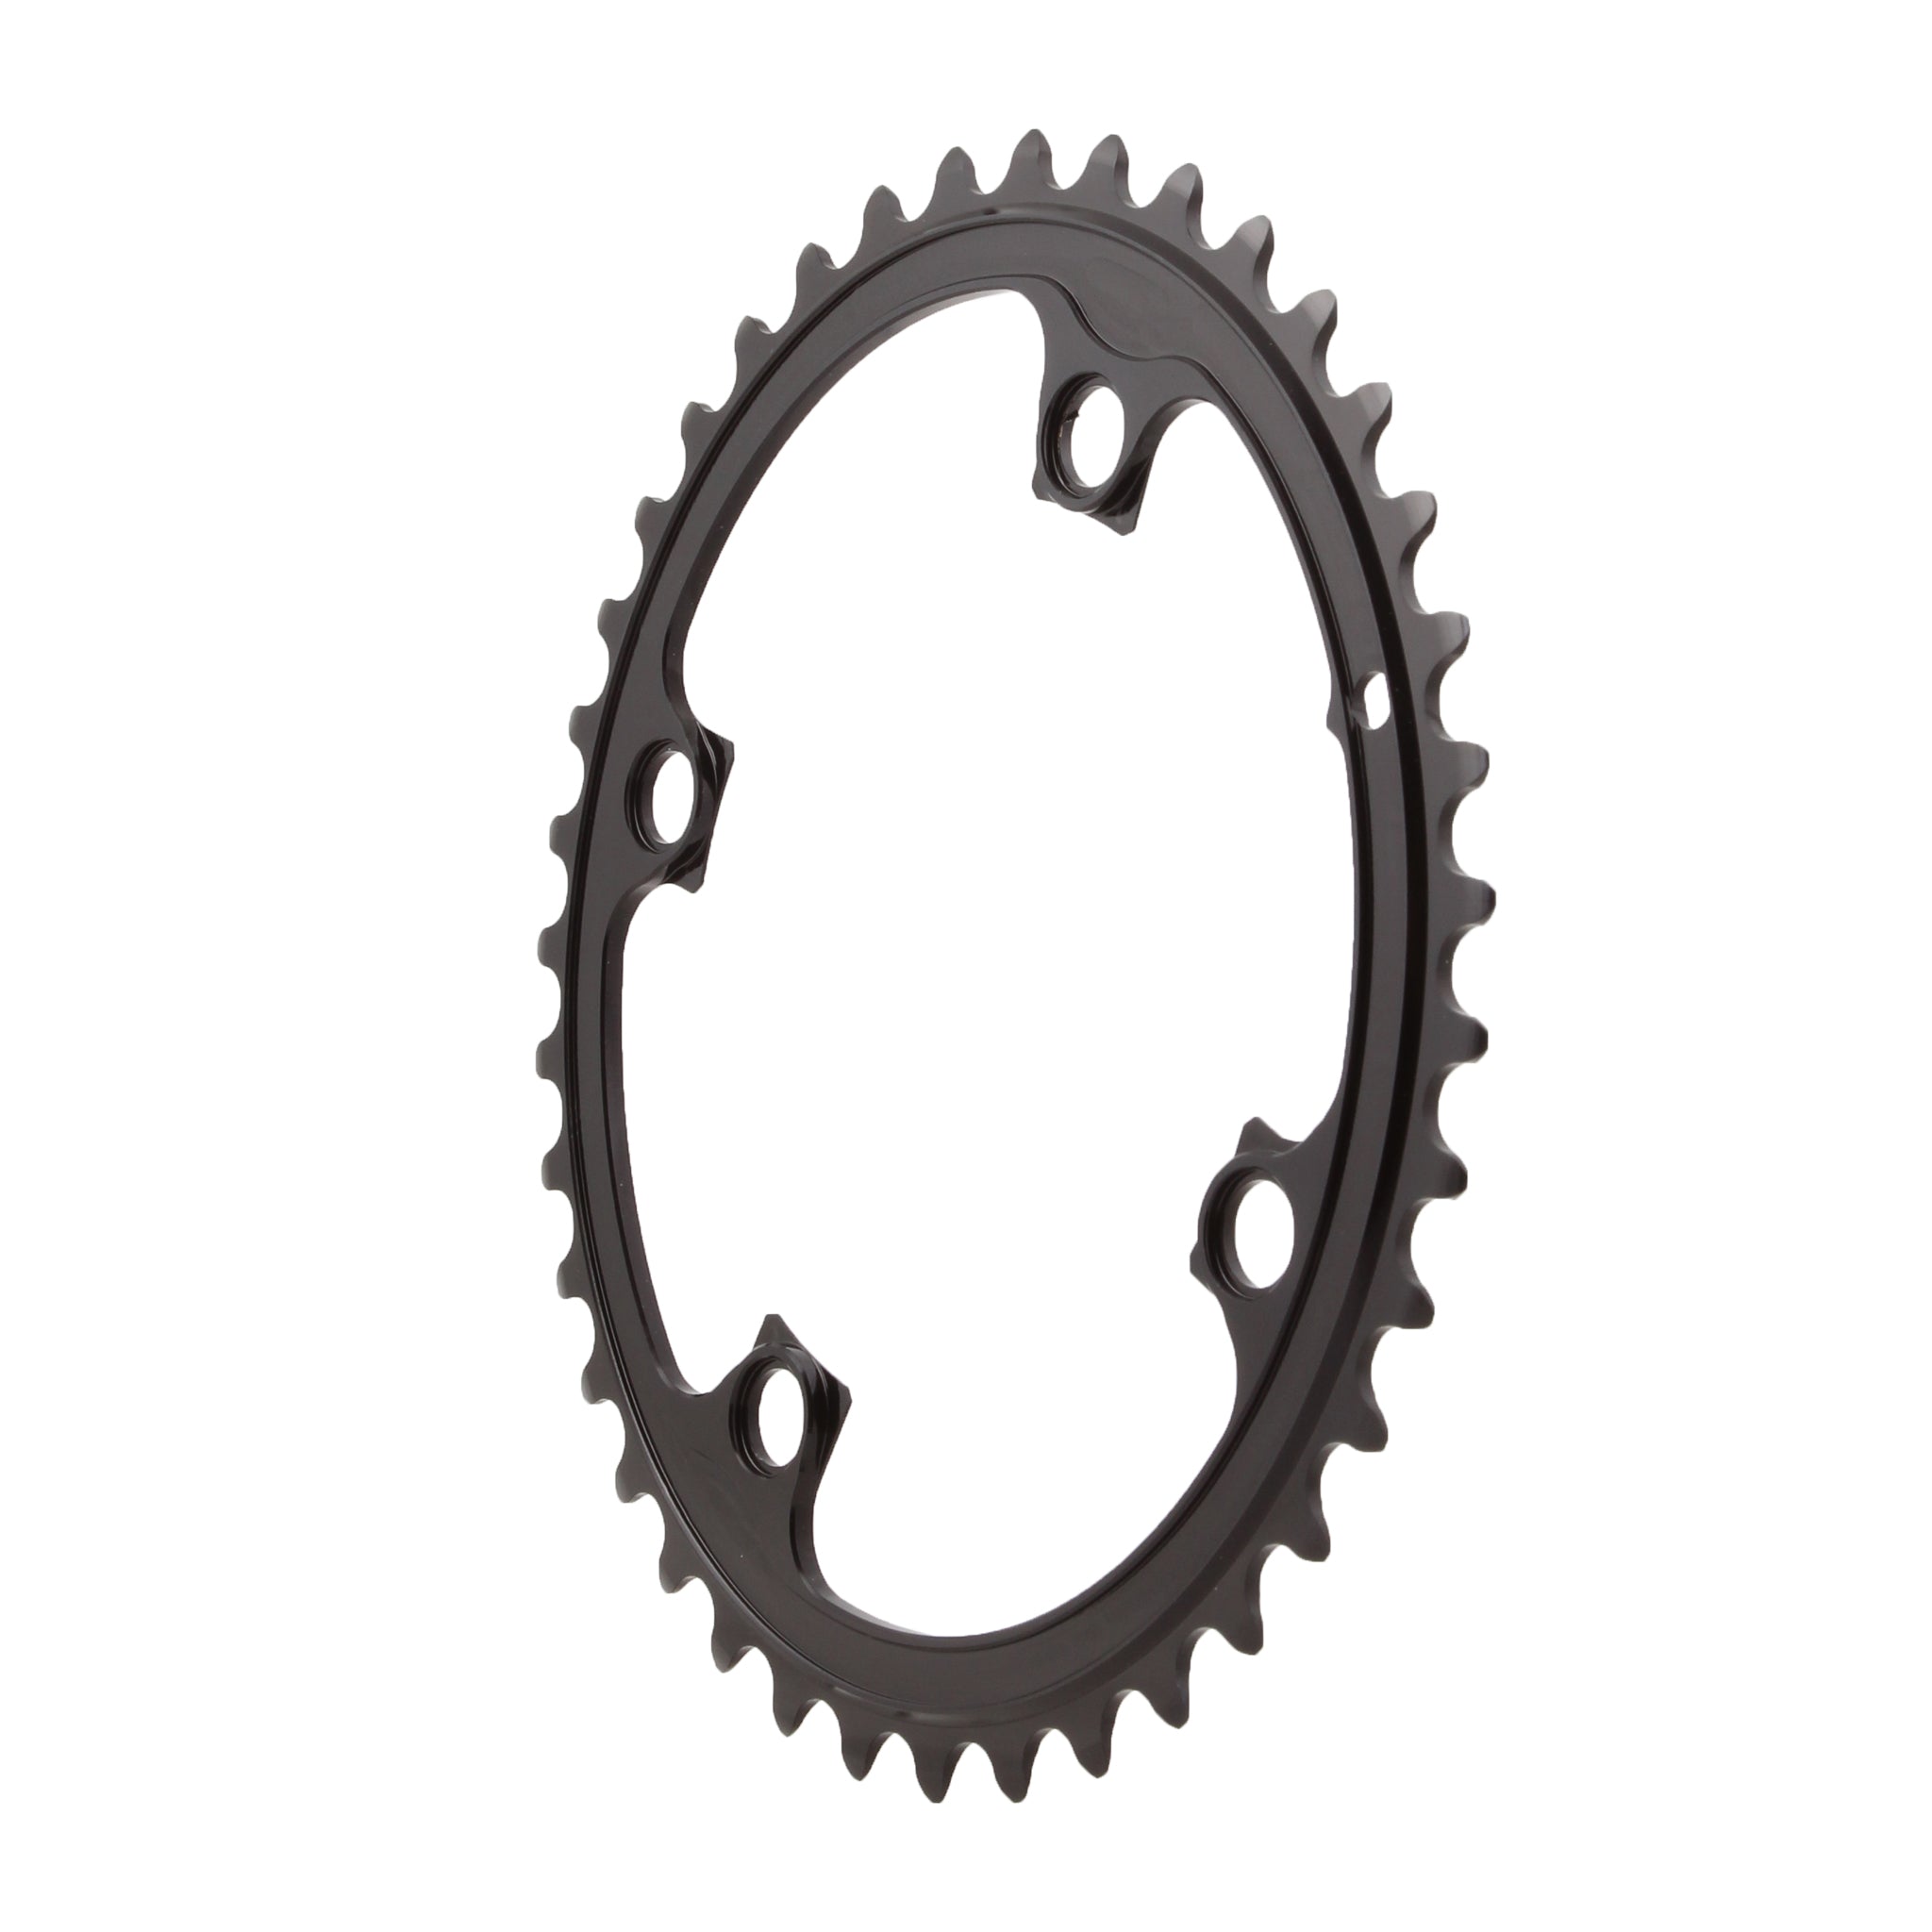 Absolute Black FSA ABS Oval Chainrings 4&amp;5x110BCD 39T - Black